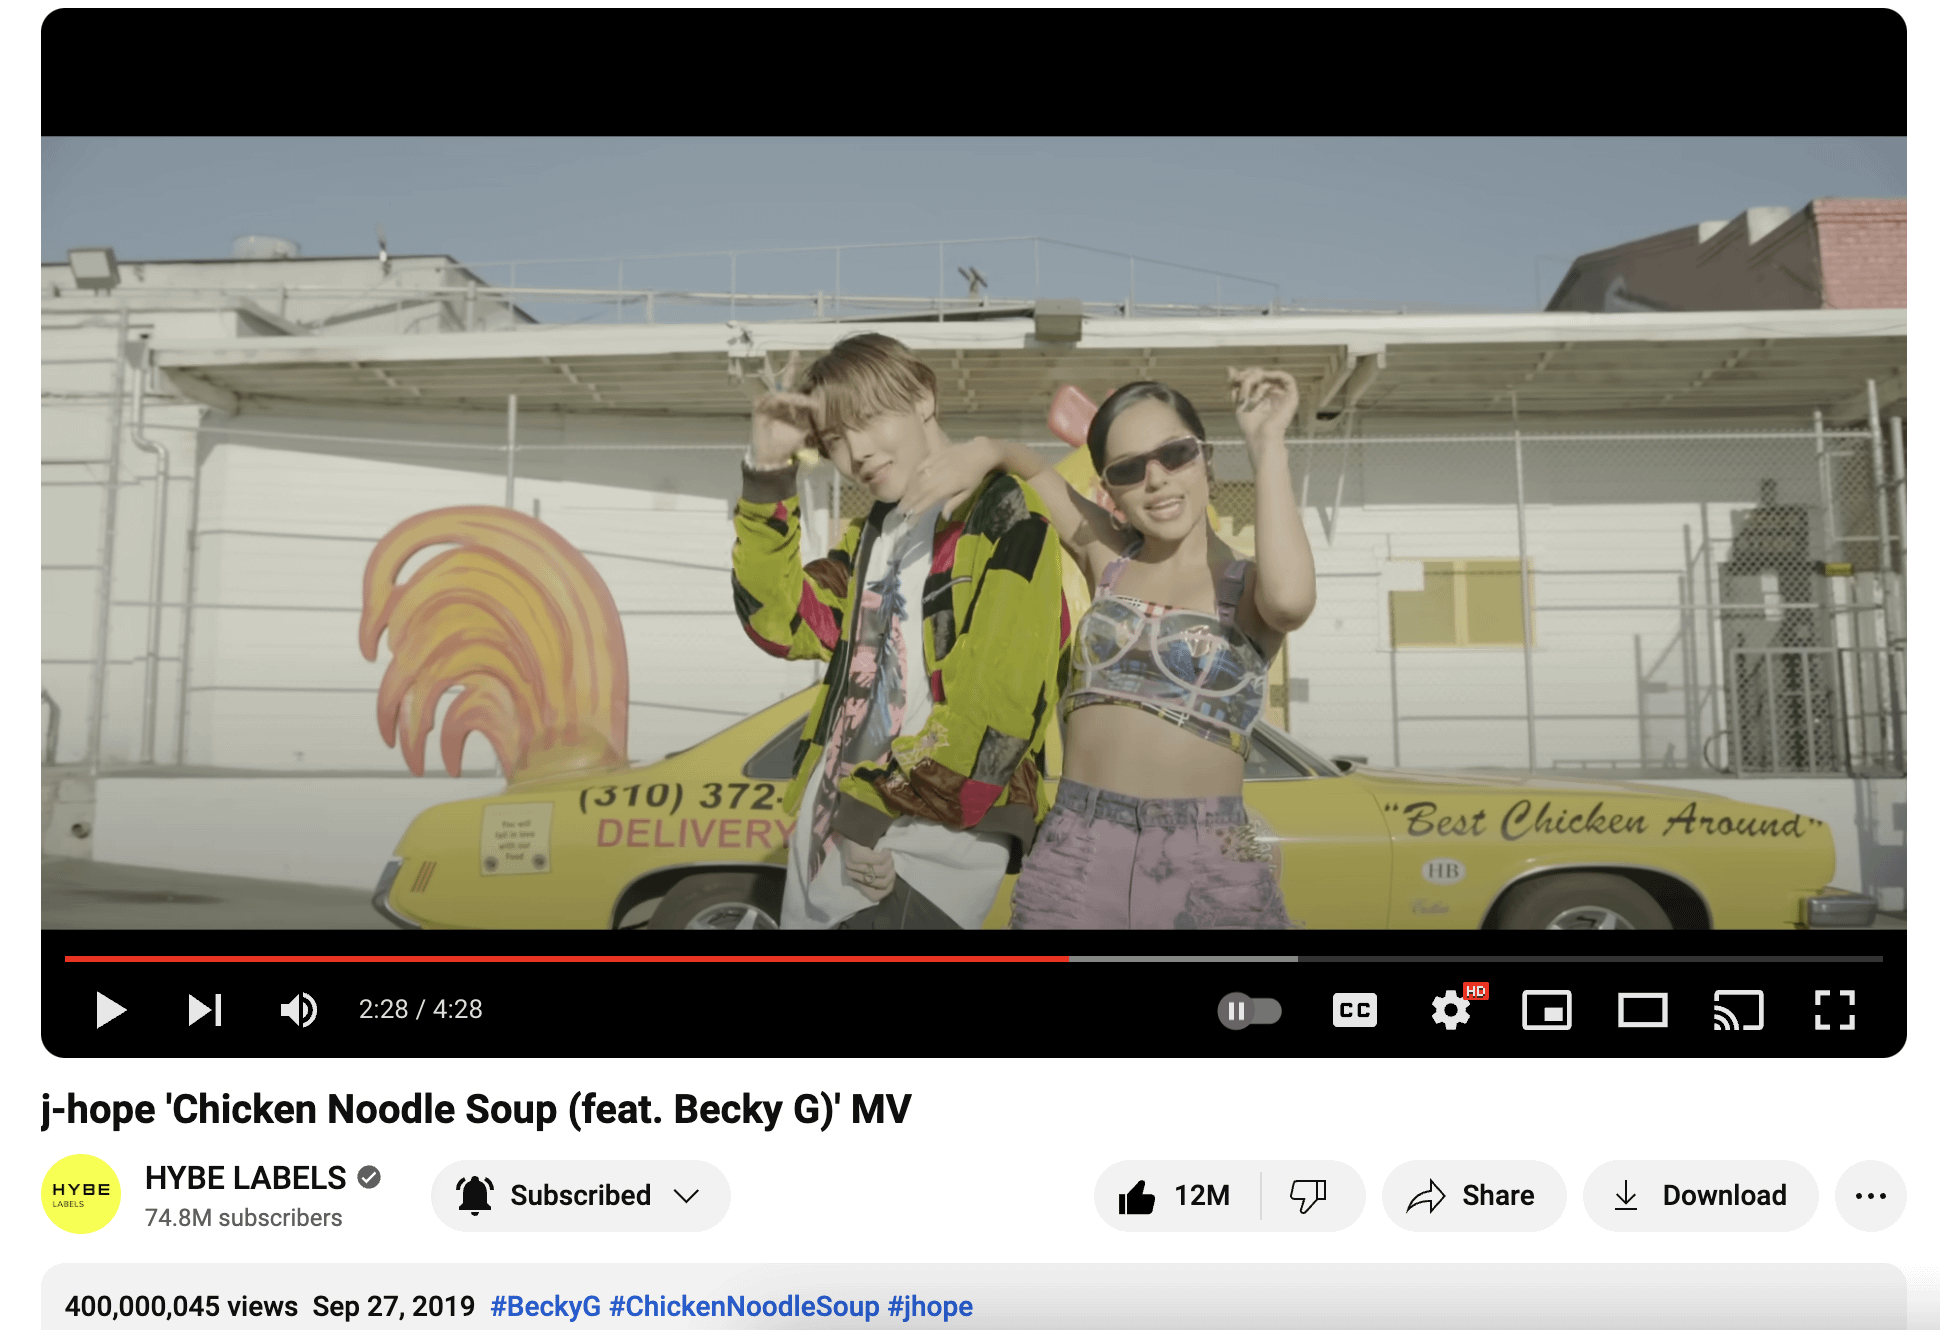 j-hope & Becky G's "Chicken Noodle Soup" MV has surpassed 400 million views on YouTube! - 120524